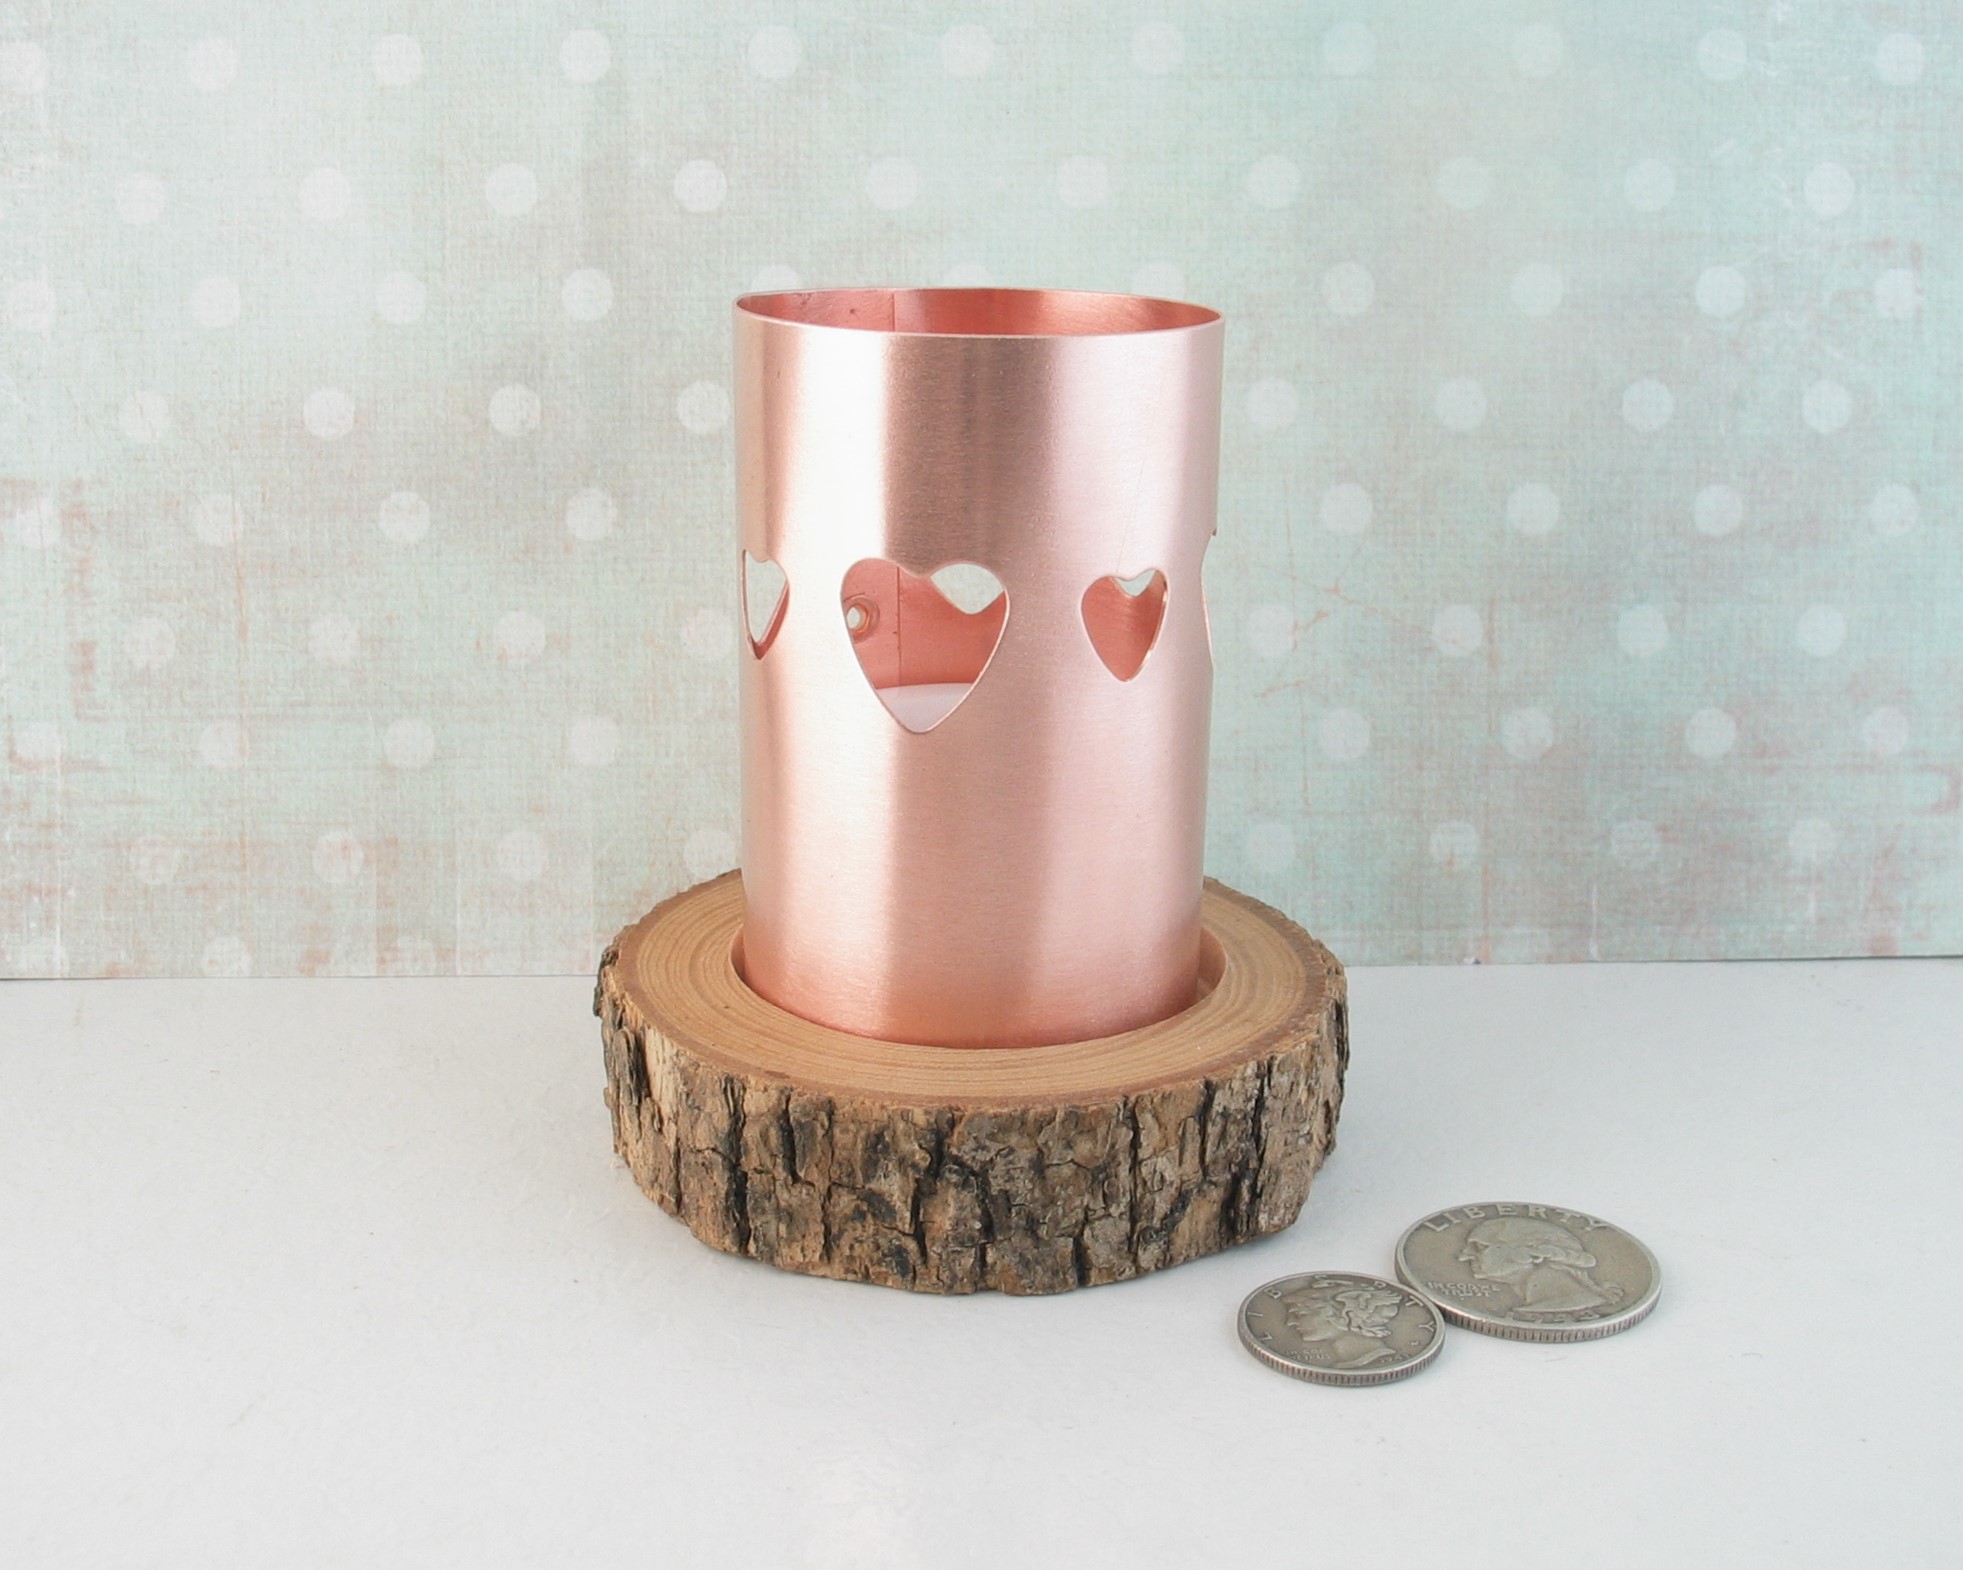 Scandanavian style heart-pierced copper chimney tea light candle holder on live-edge wooden base cut from tree limb. comes with flameless tealight candle. shown with dime and quarter for size comparison